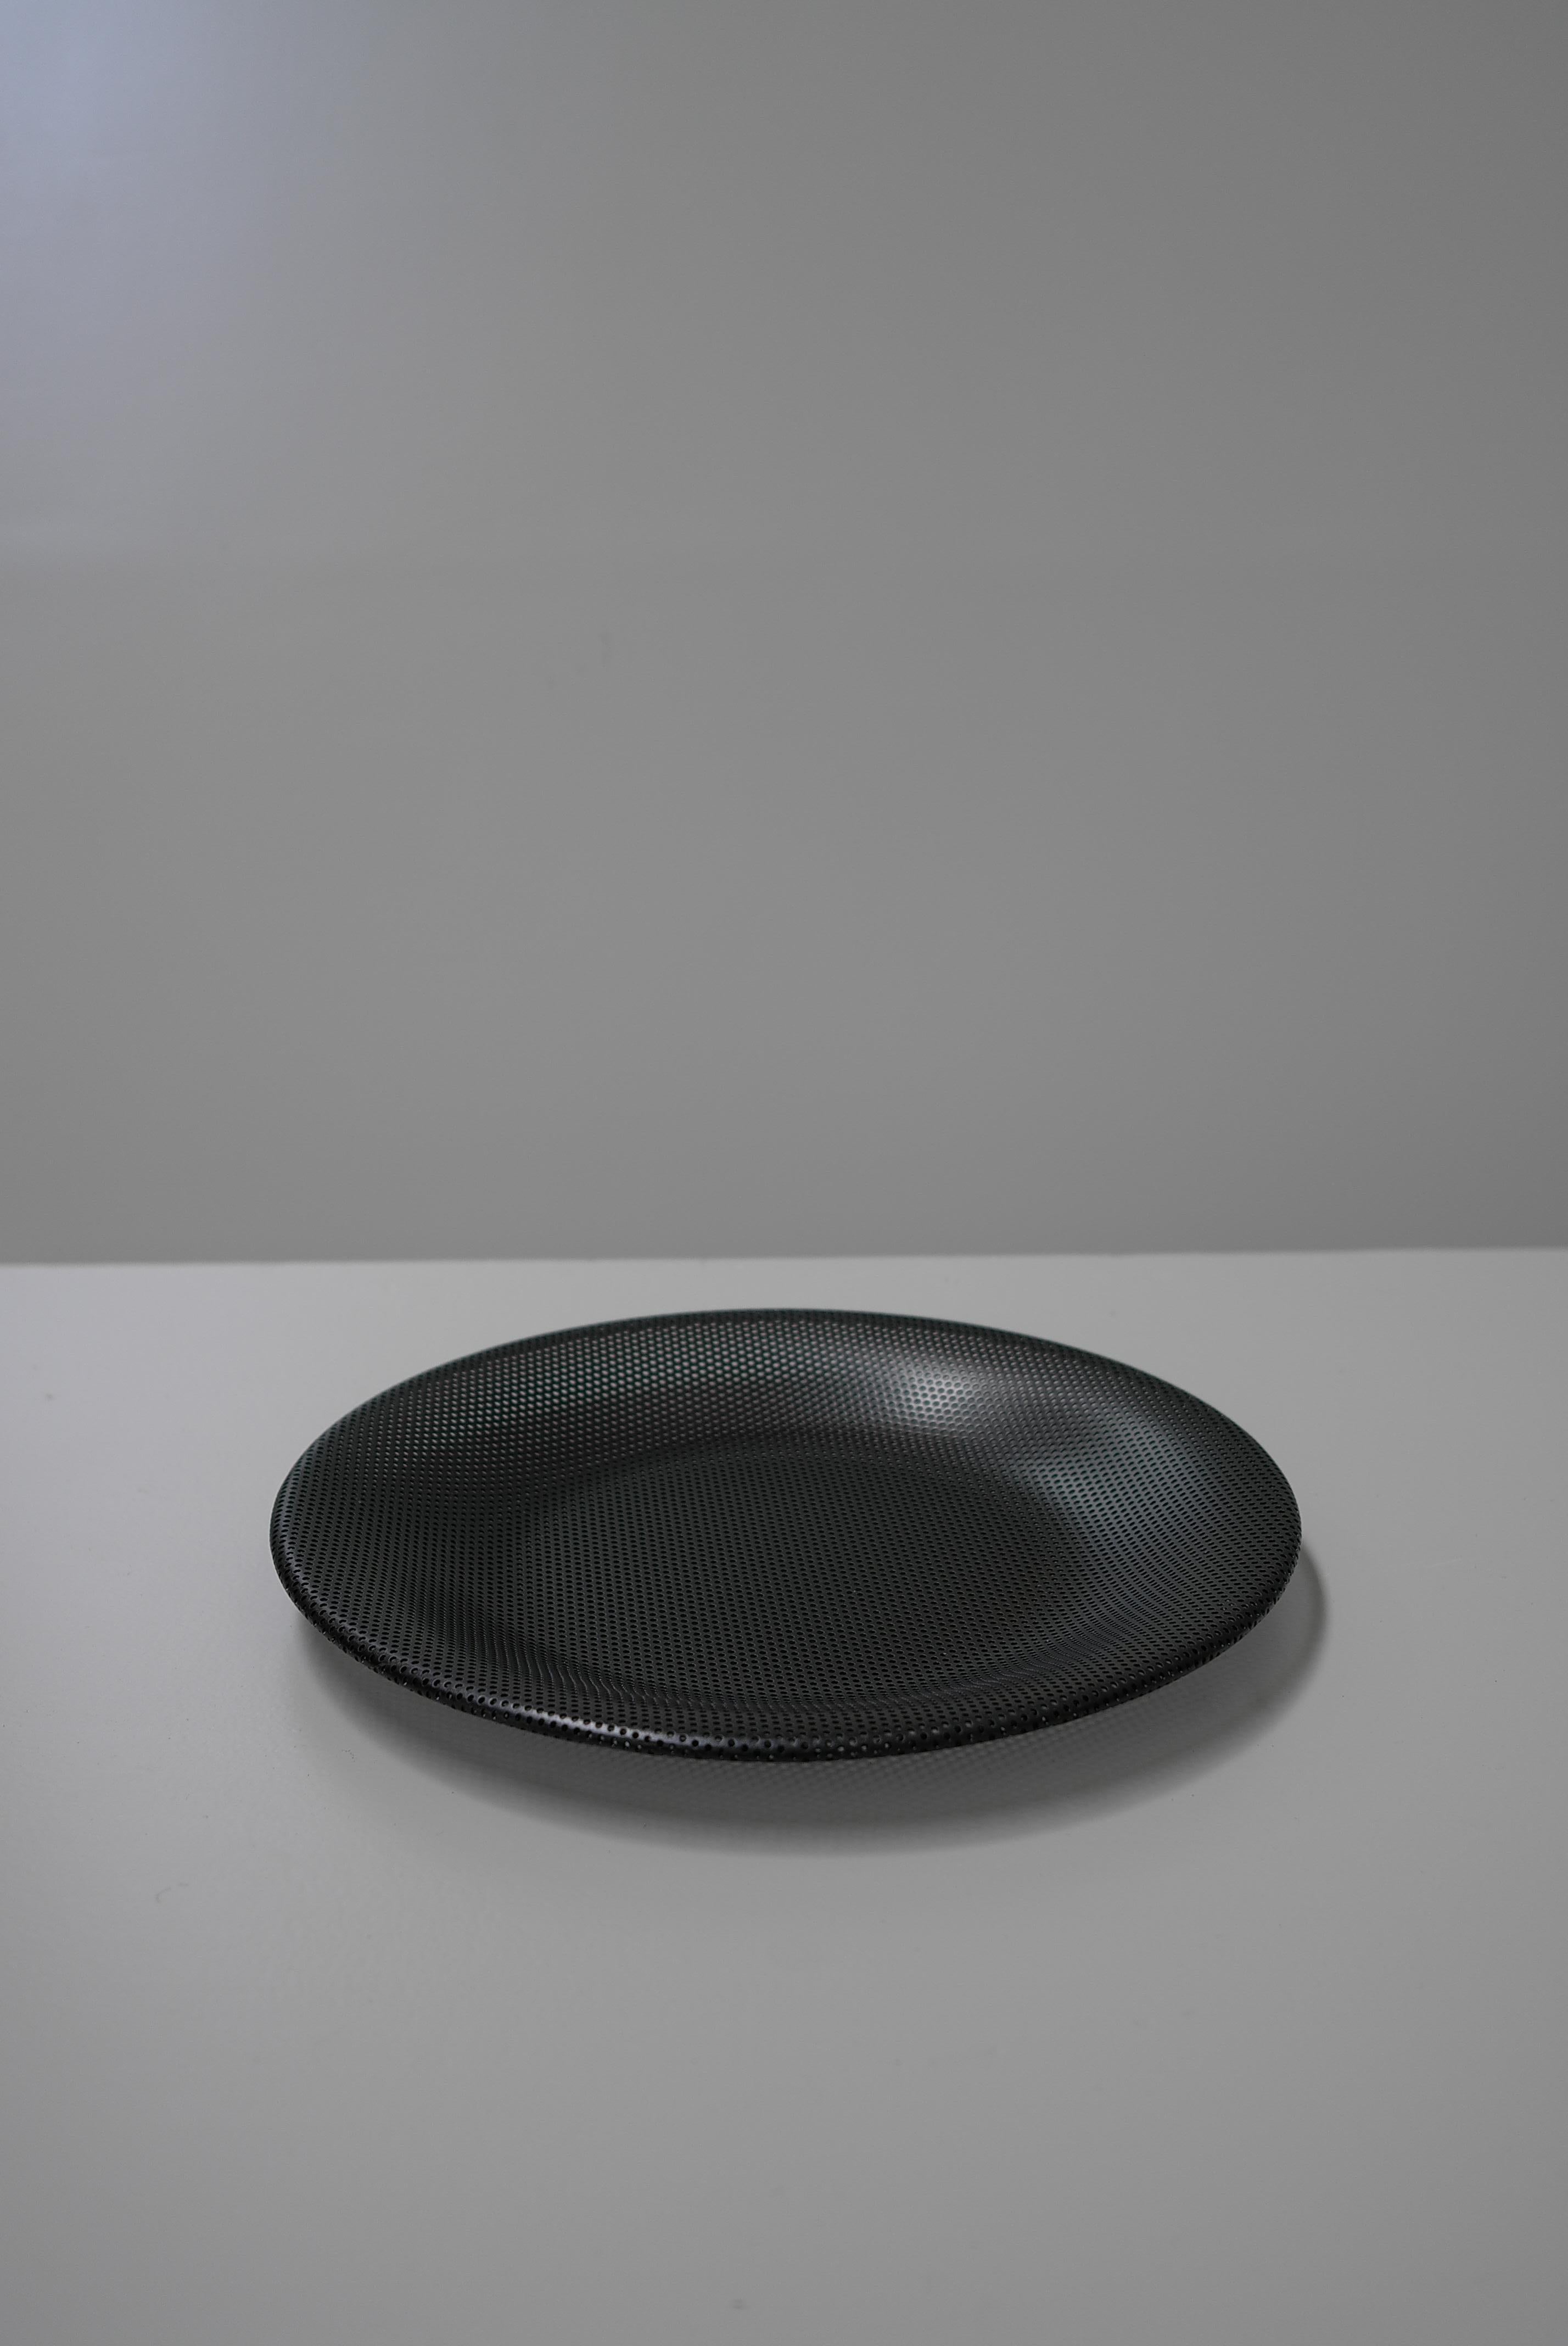 Mid-Century Modern Round Black Metal Tray Designed by Mathieu Matégot, France, 1950s For Sale